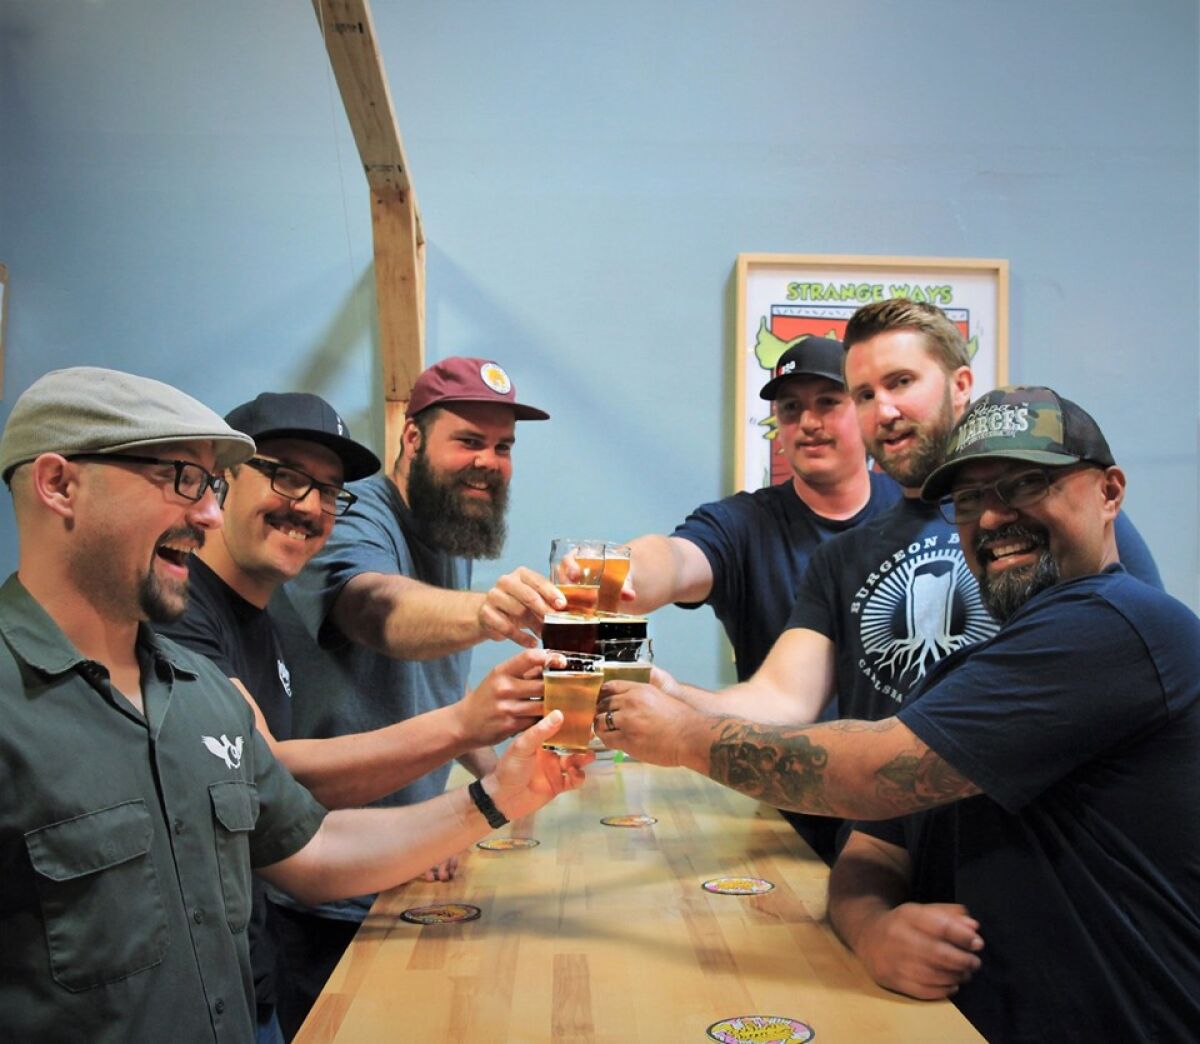 Seven Carlsbad breweries came together to brew a collaborative beer for Carlsbad Brewfest.